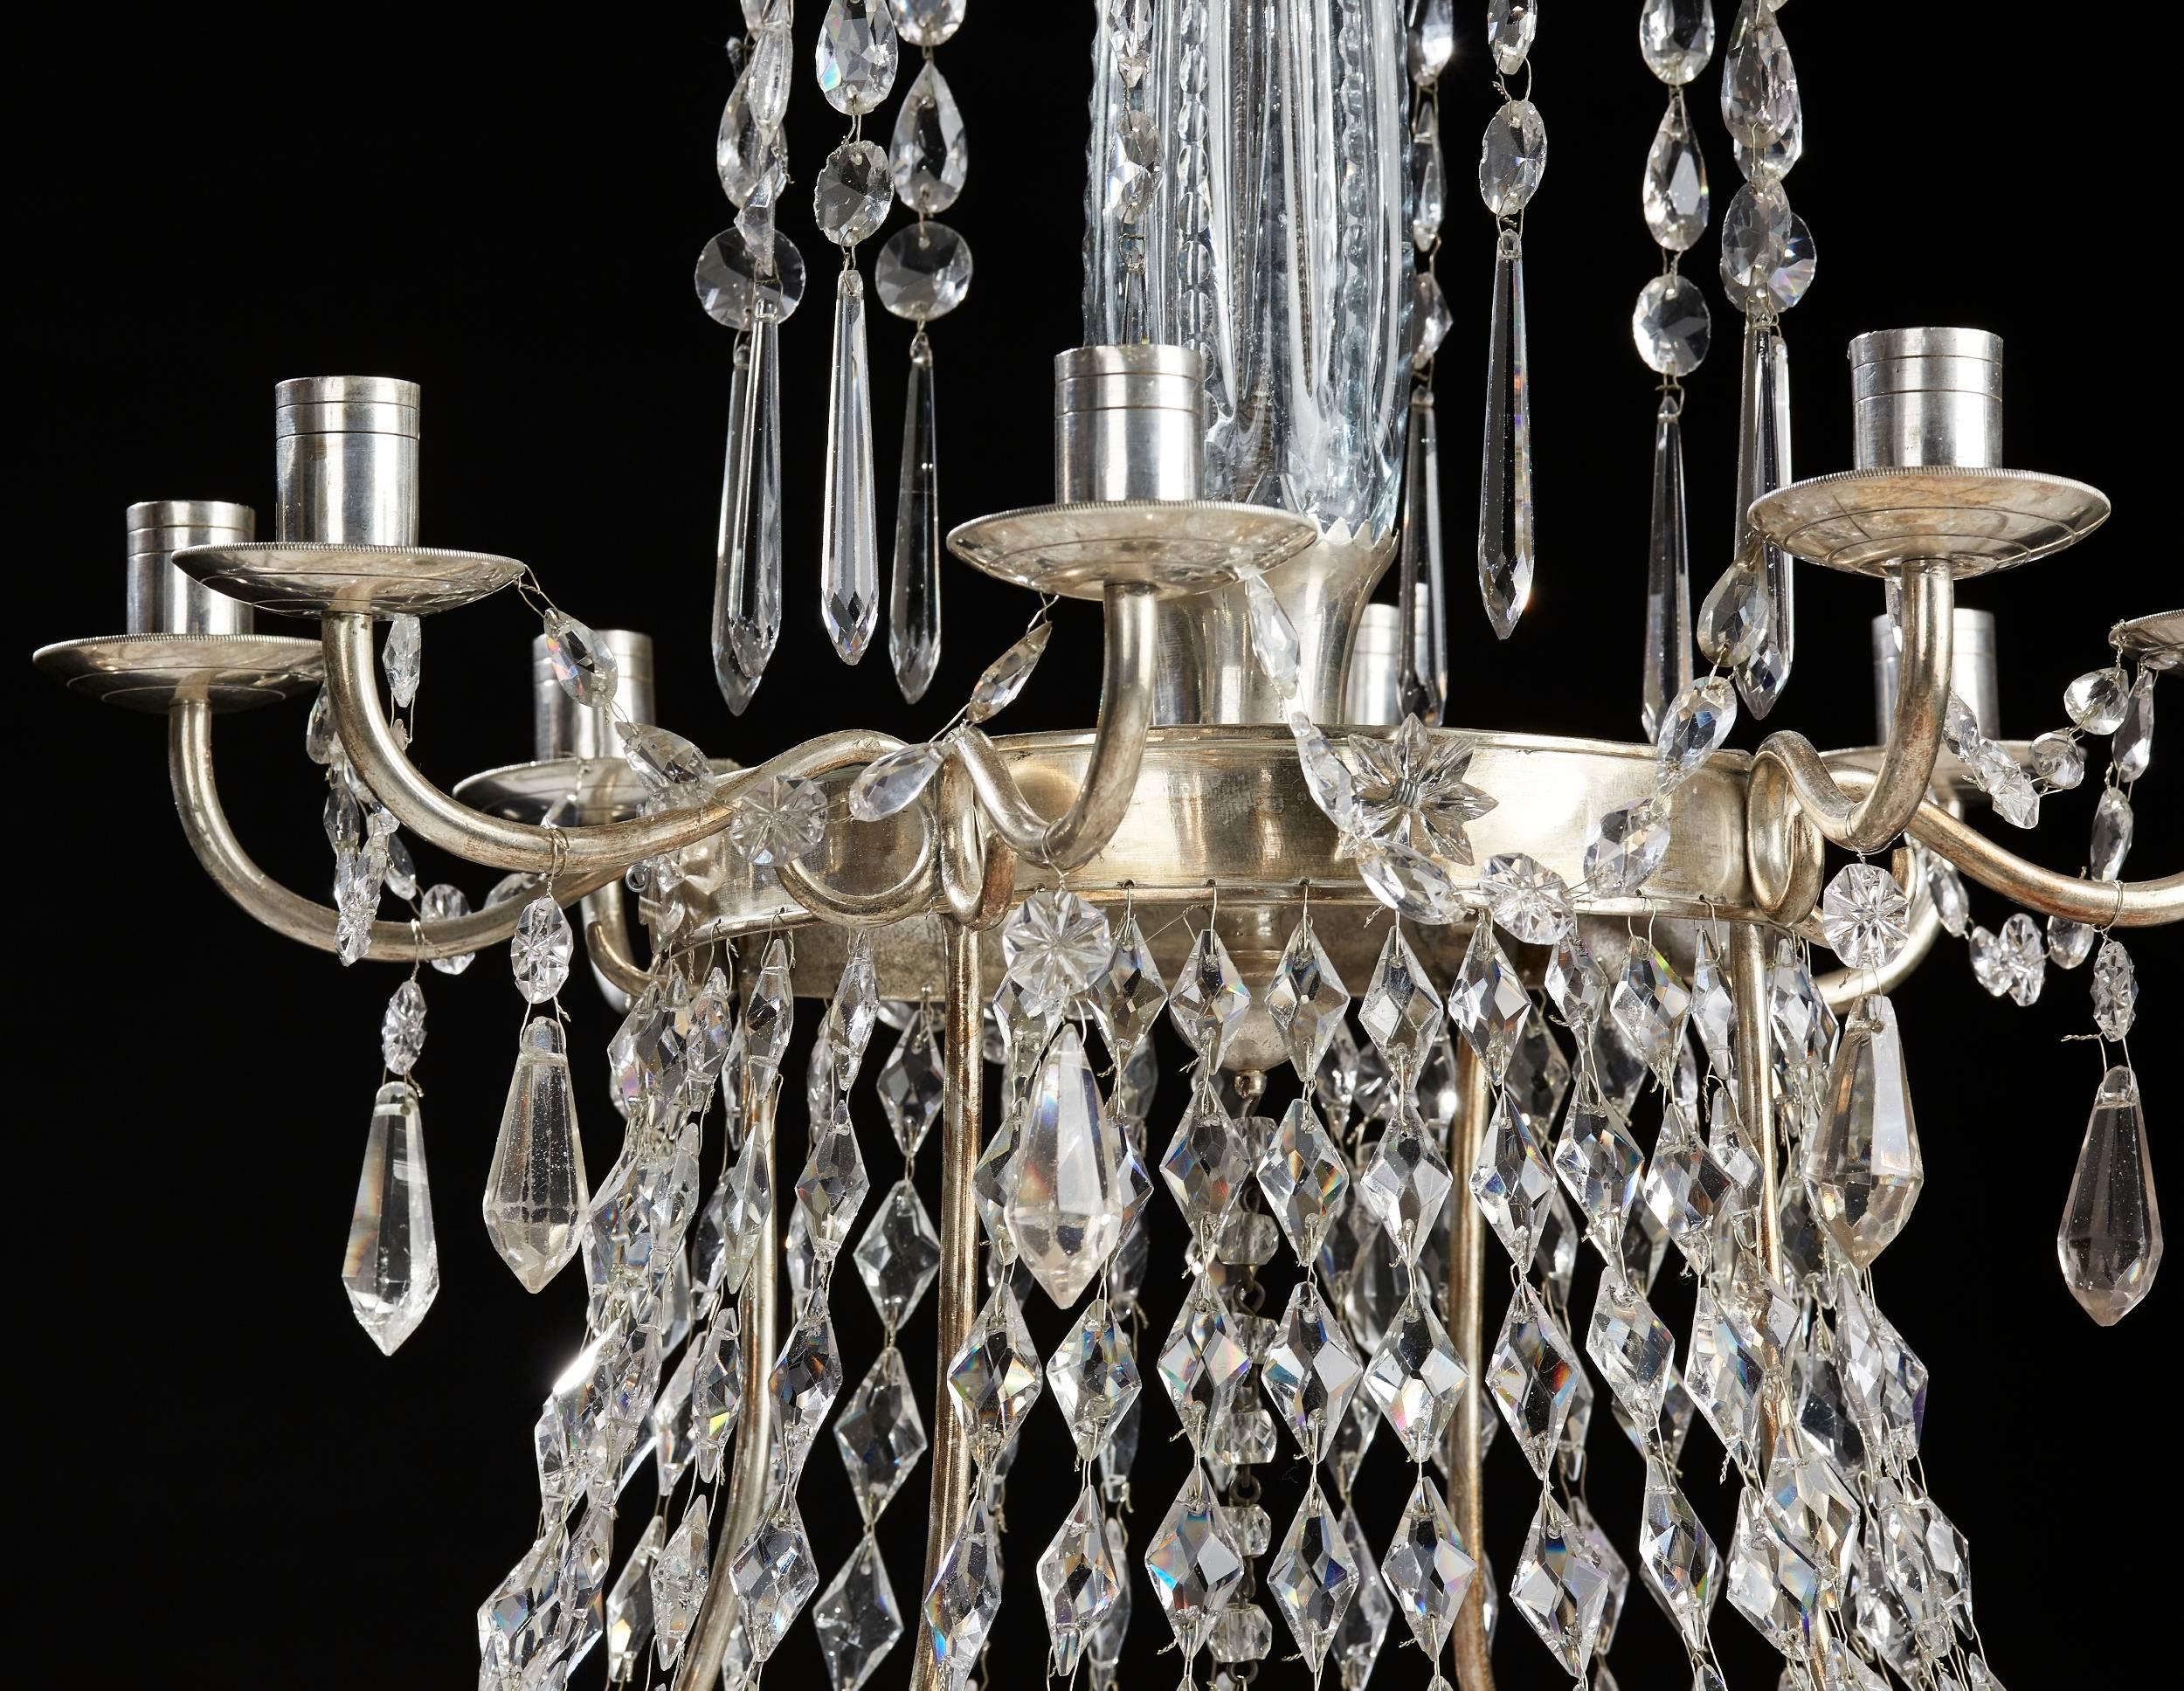 Silvered Silver Plated Bronze and Crystal Chandelier, Possibly Russian, 19th Century